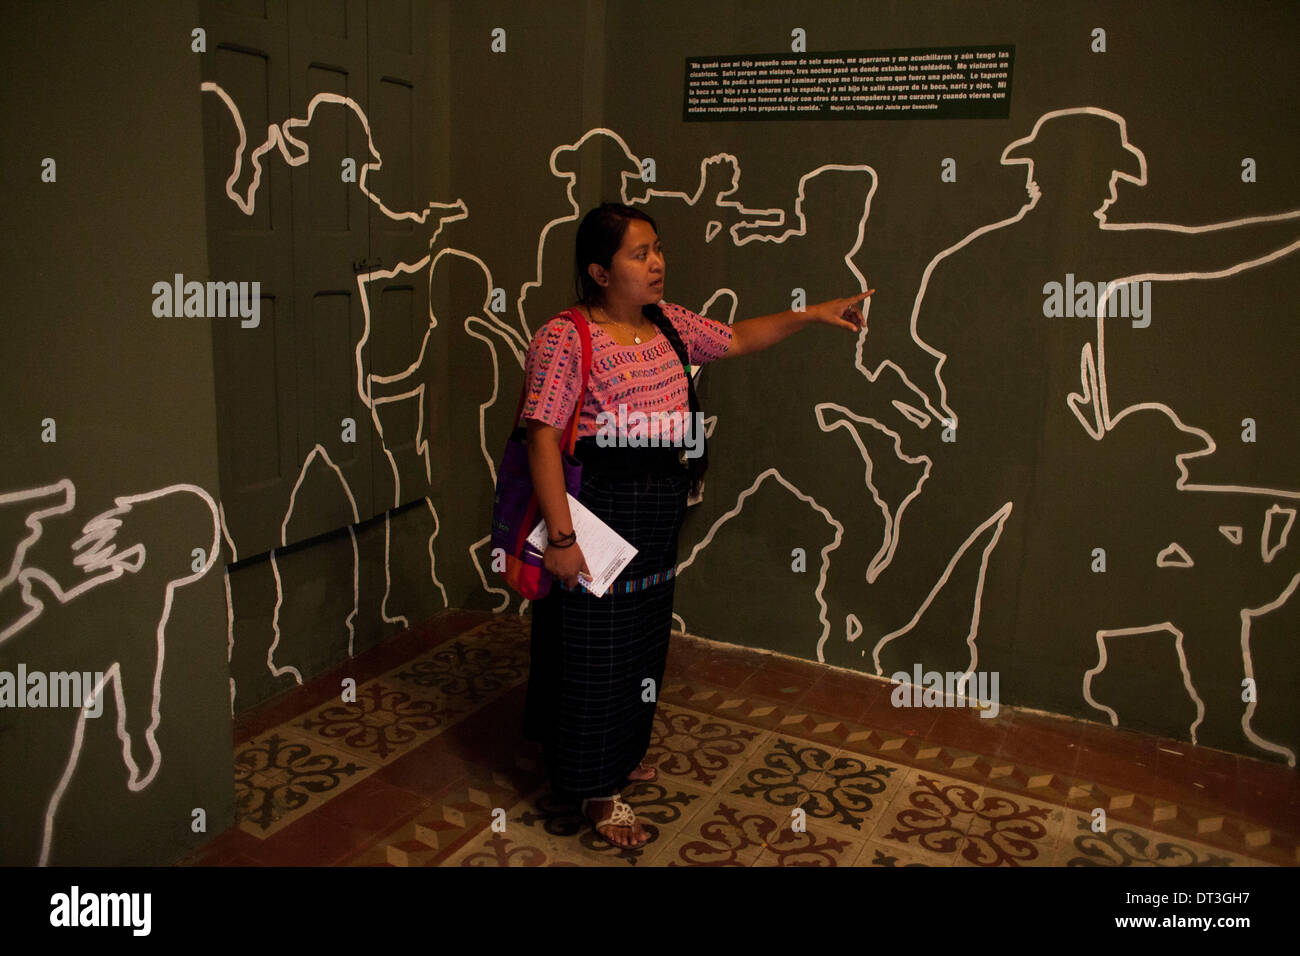 Guatemala City, Guatemala. 7th Feb, 2014. A woman looks at a mural that represents soldiers of the army attacking civilians during the internal armed conflict in Guatemala (1960-1996), which left 200,000 victims, at 'Kaji Tulam' Museum in Guatemala City, capital of Guatemala, on Feb. 7, 2014. The non-governmental organization Center of Legal Action for Human Rights (CALDH, for its acronym in Spanish), opened the museum to contribute to the recovery of historical memory from the Spanish conquest up to the present. © Luis Echeverria/Xinhua/Alamy Live News Stock Photo